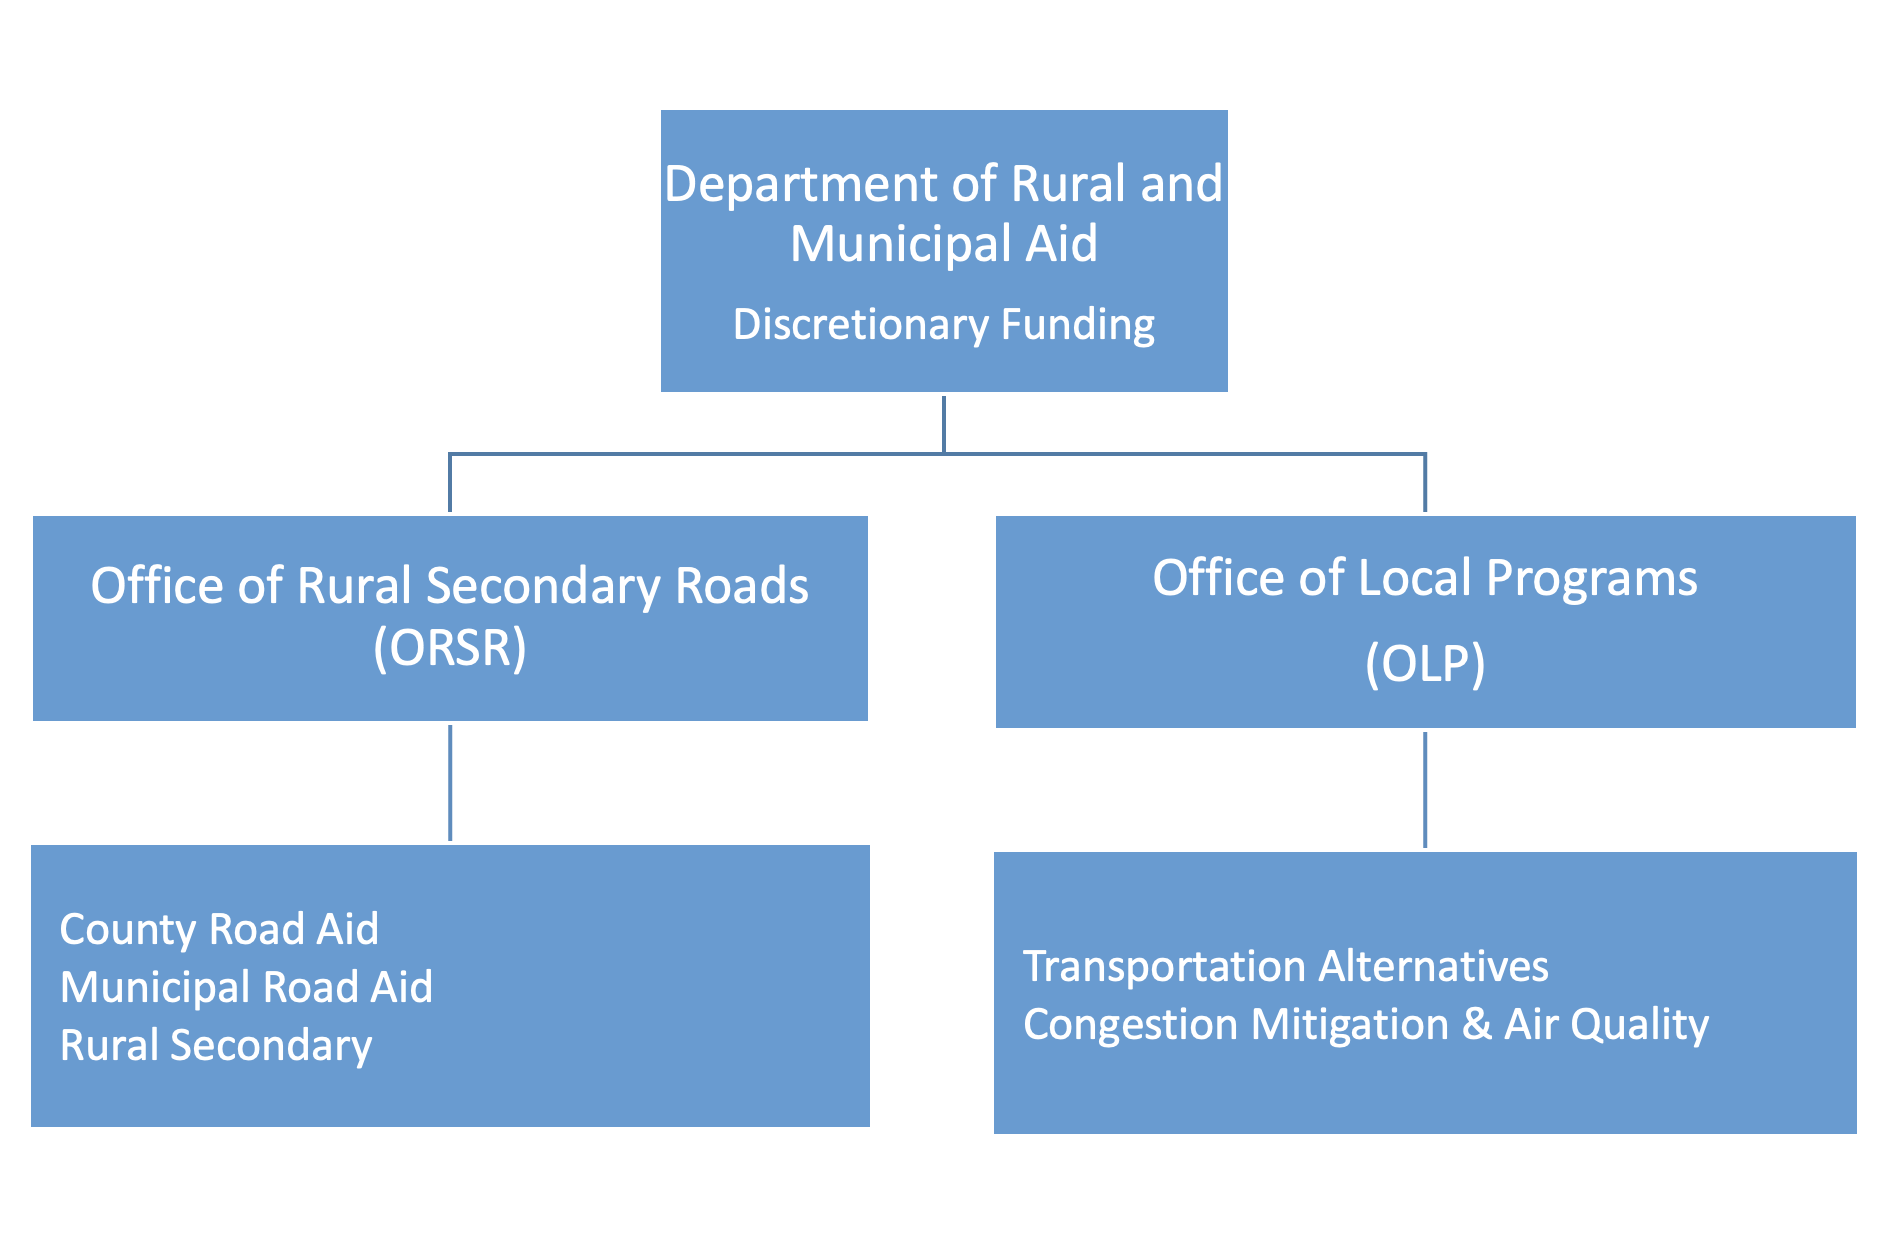 Total Statewide County Road Aid Funding (CRA)